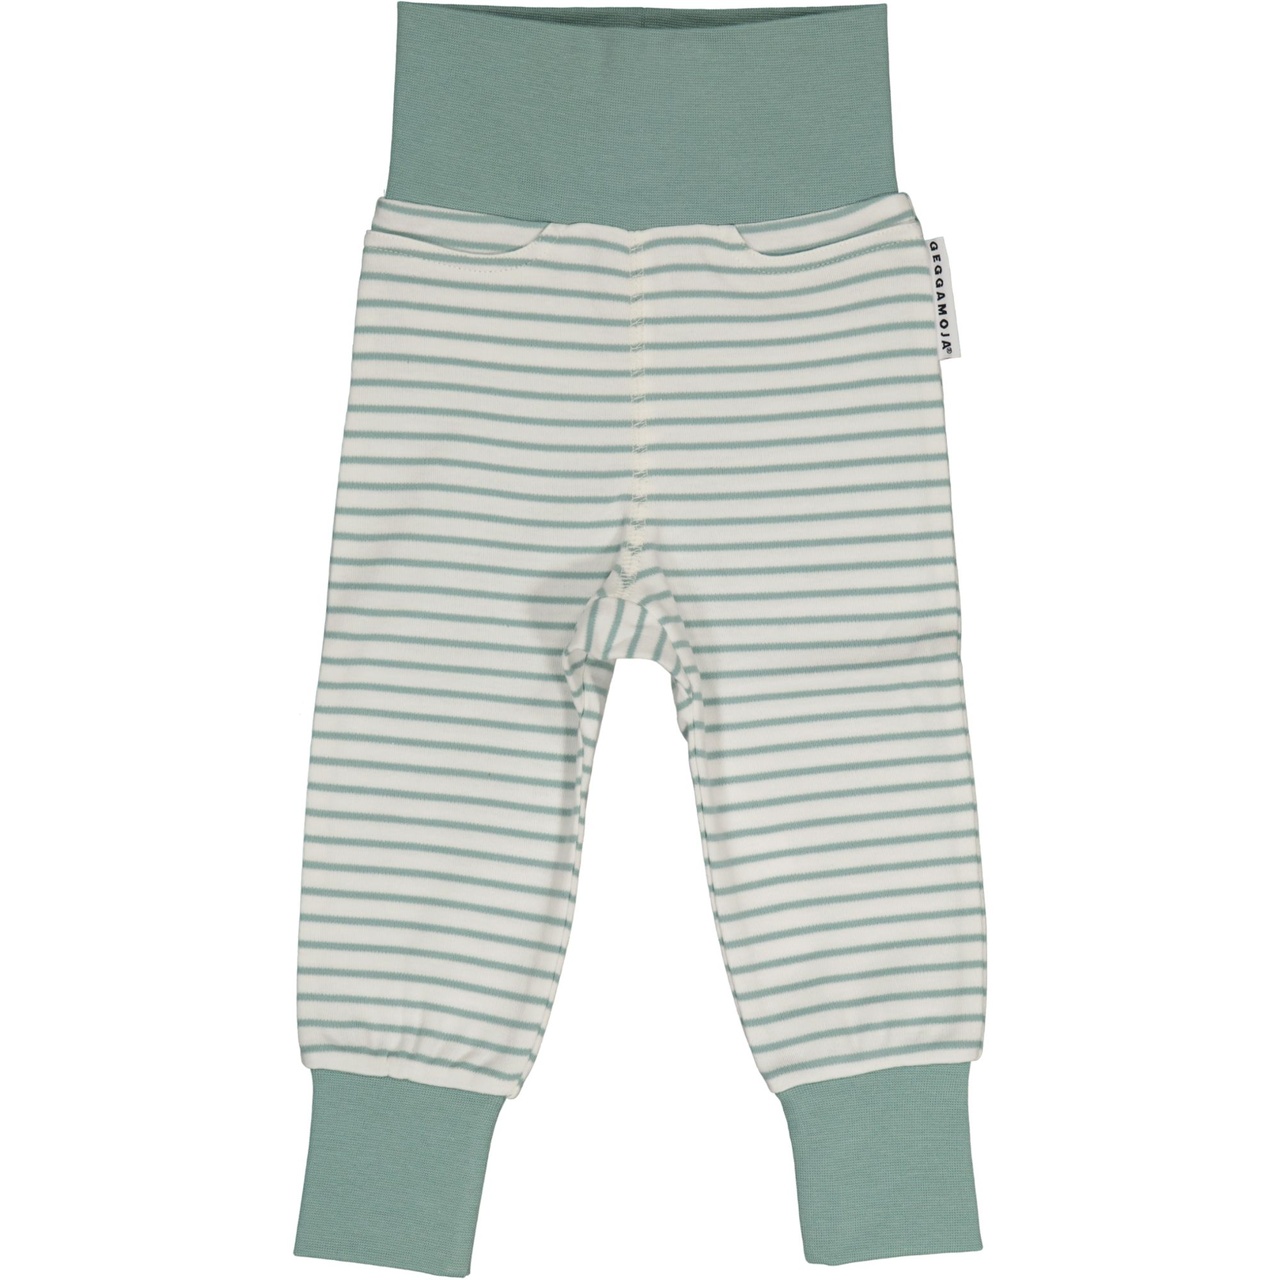 Baby trouser L.green/offwhite 62/68